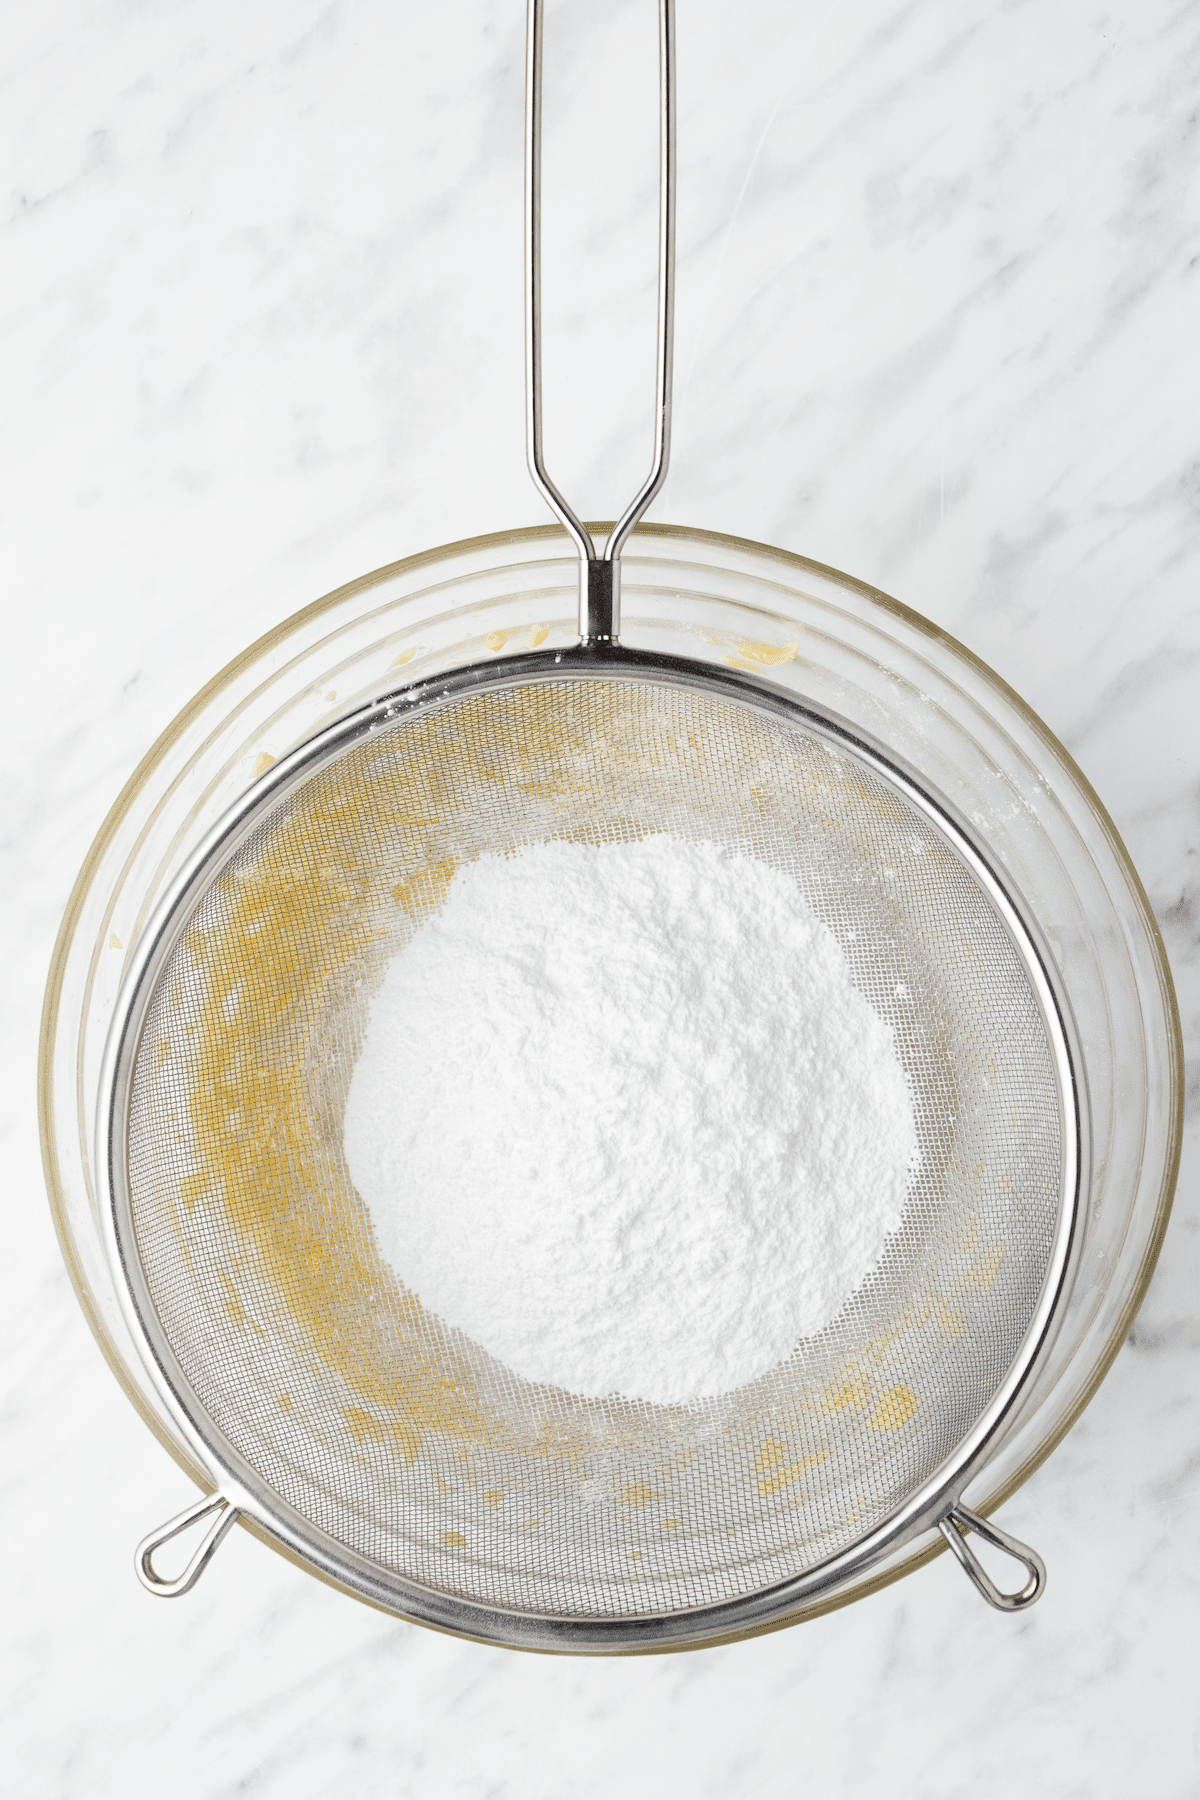 Powdered sugar being sifted into butter